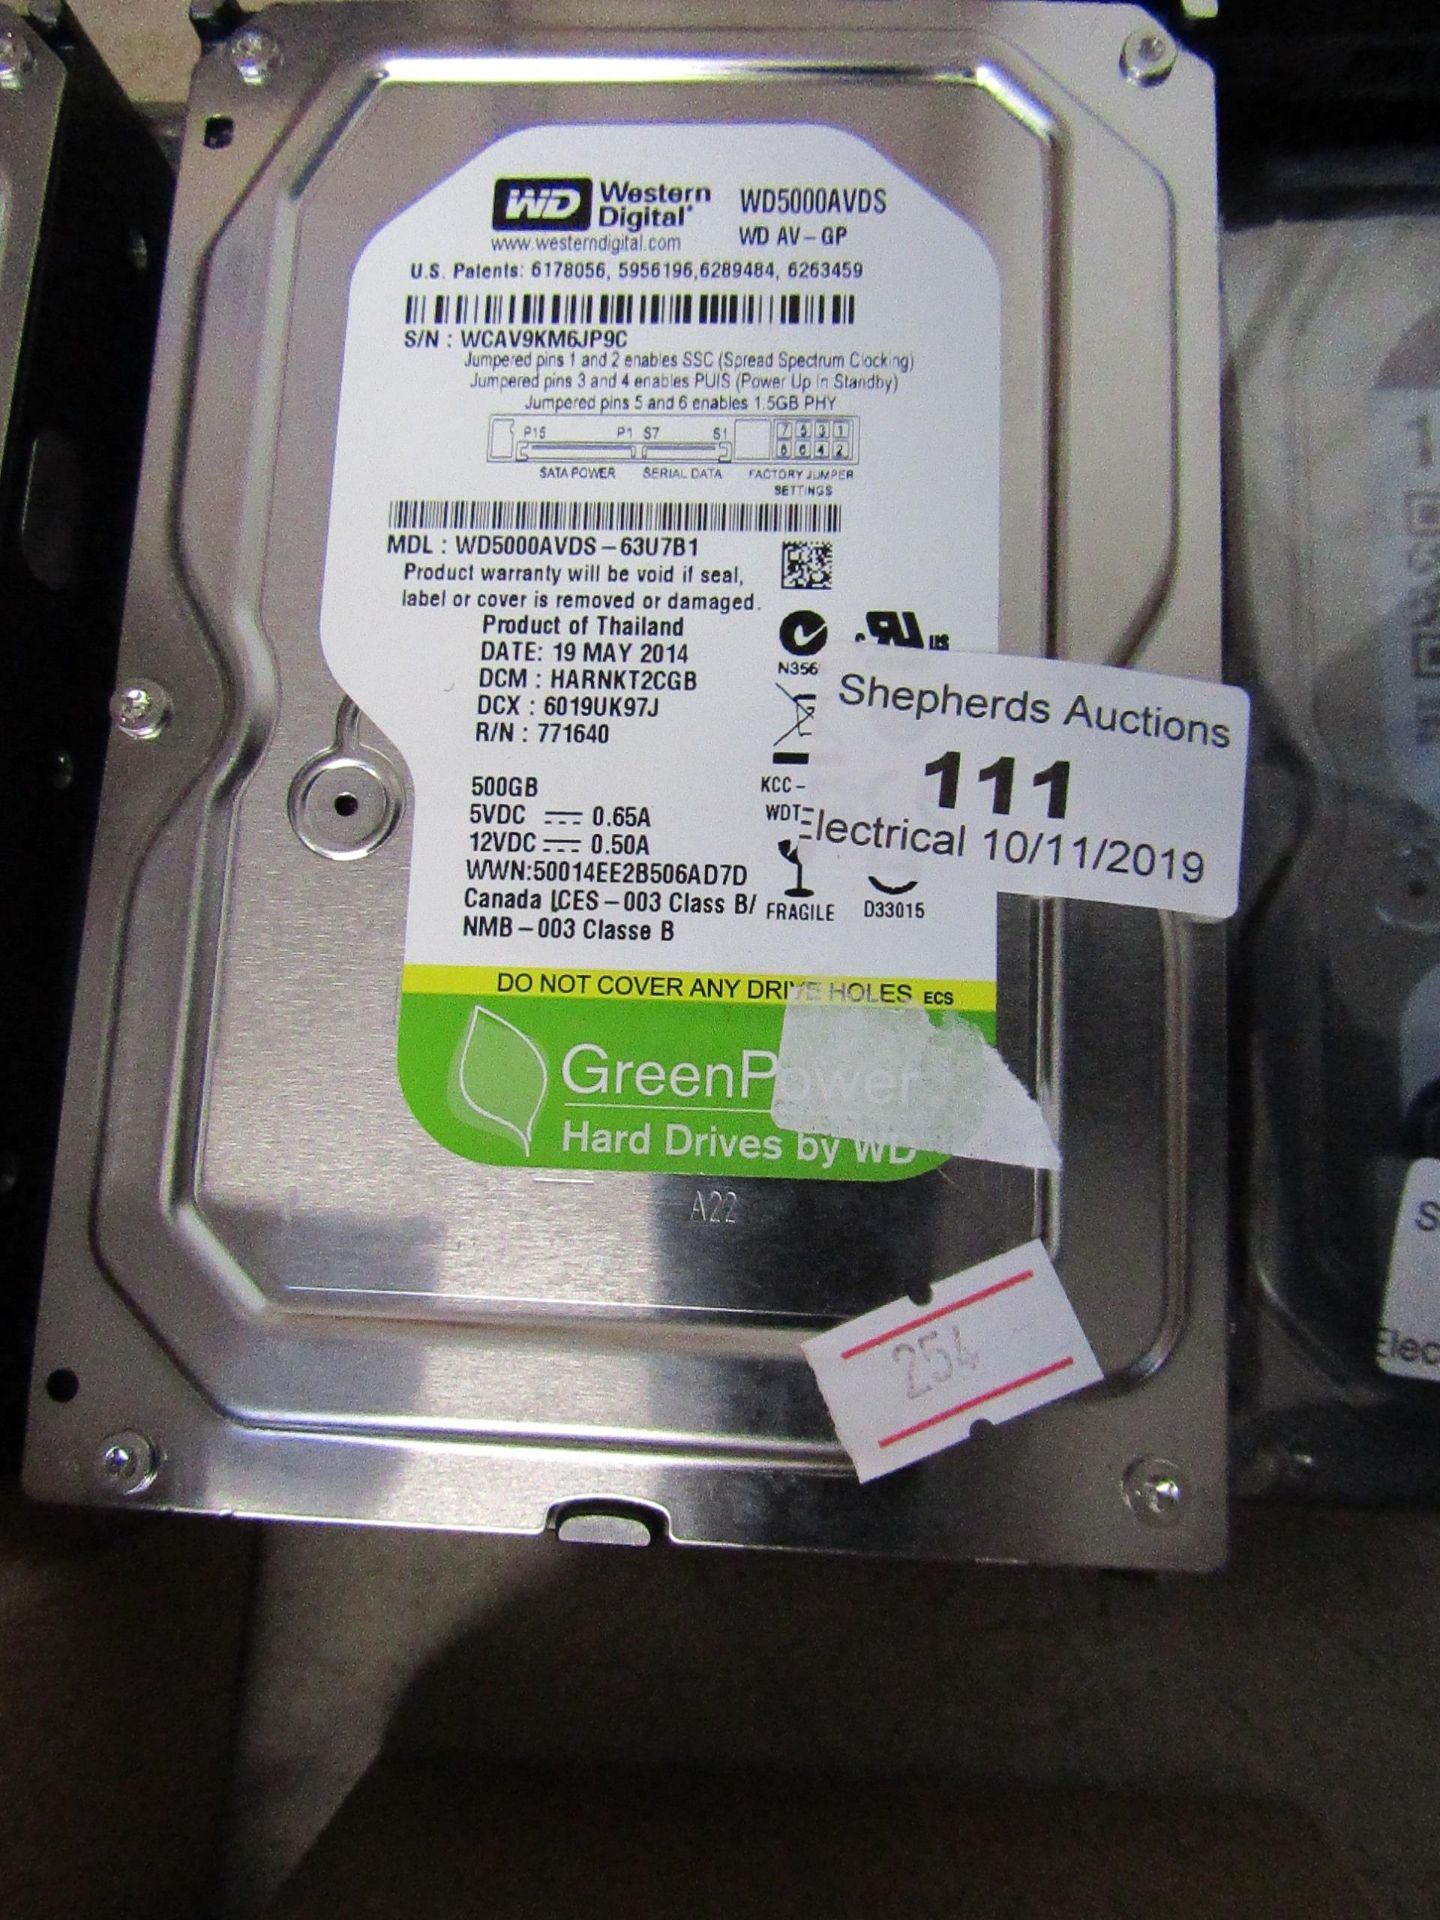 2x Western Digital 500GB hard drives, tested working and boxed.